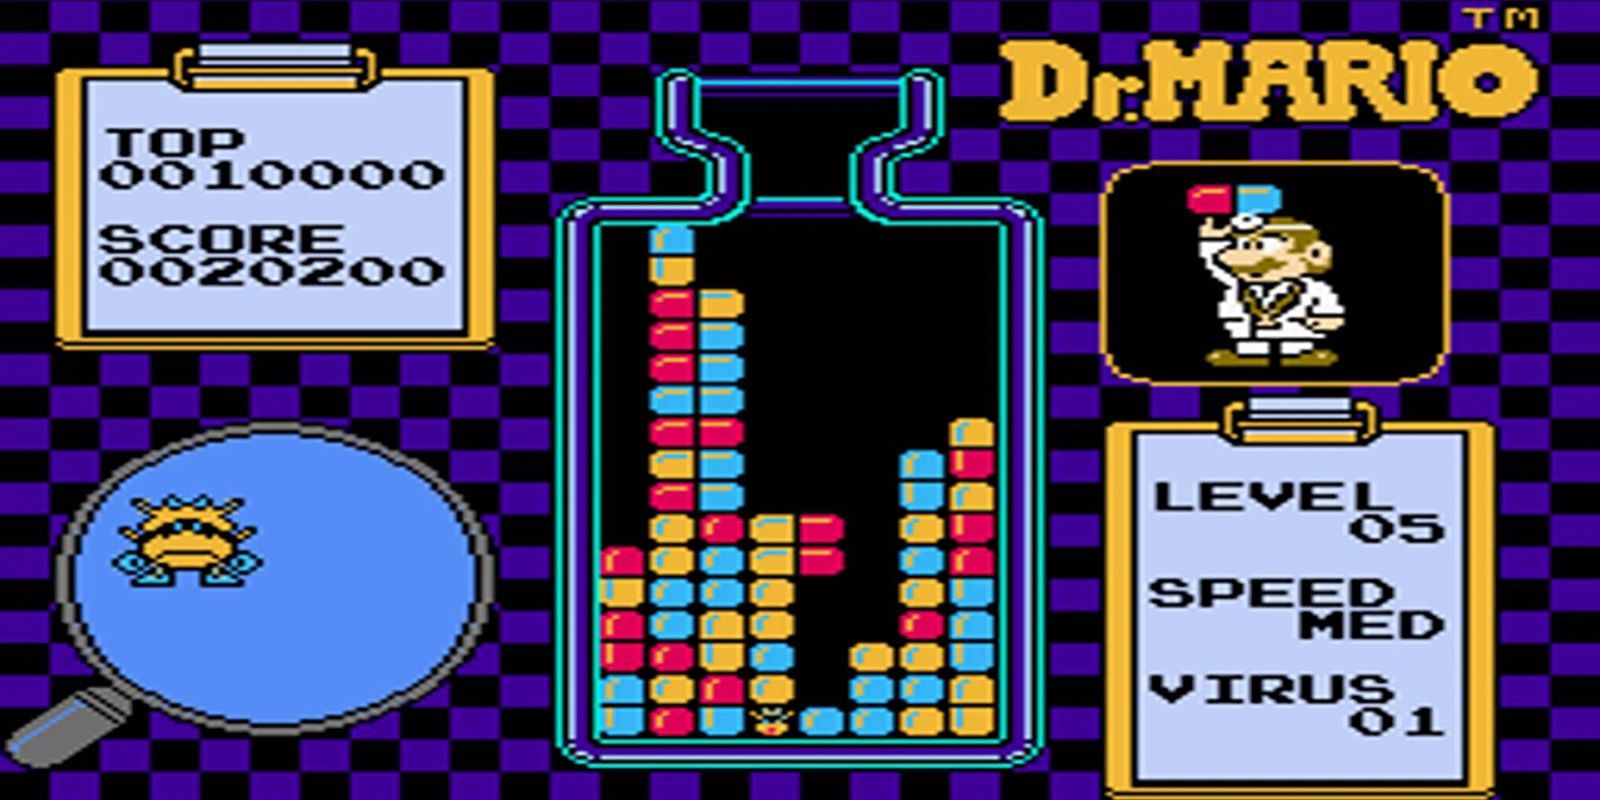 Dr. Mario gameplay from the NES game